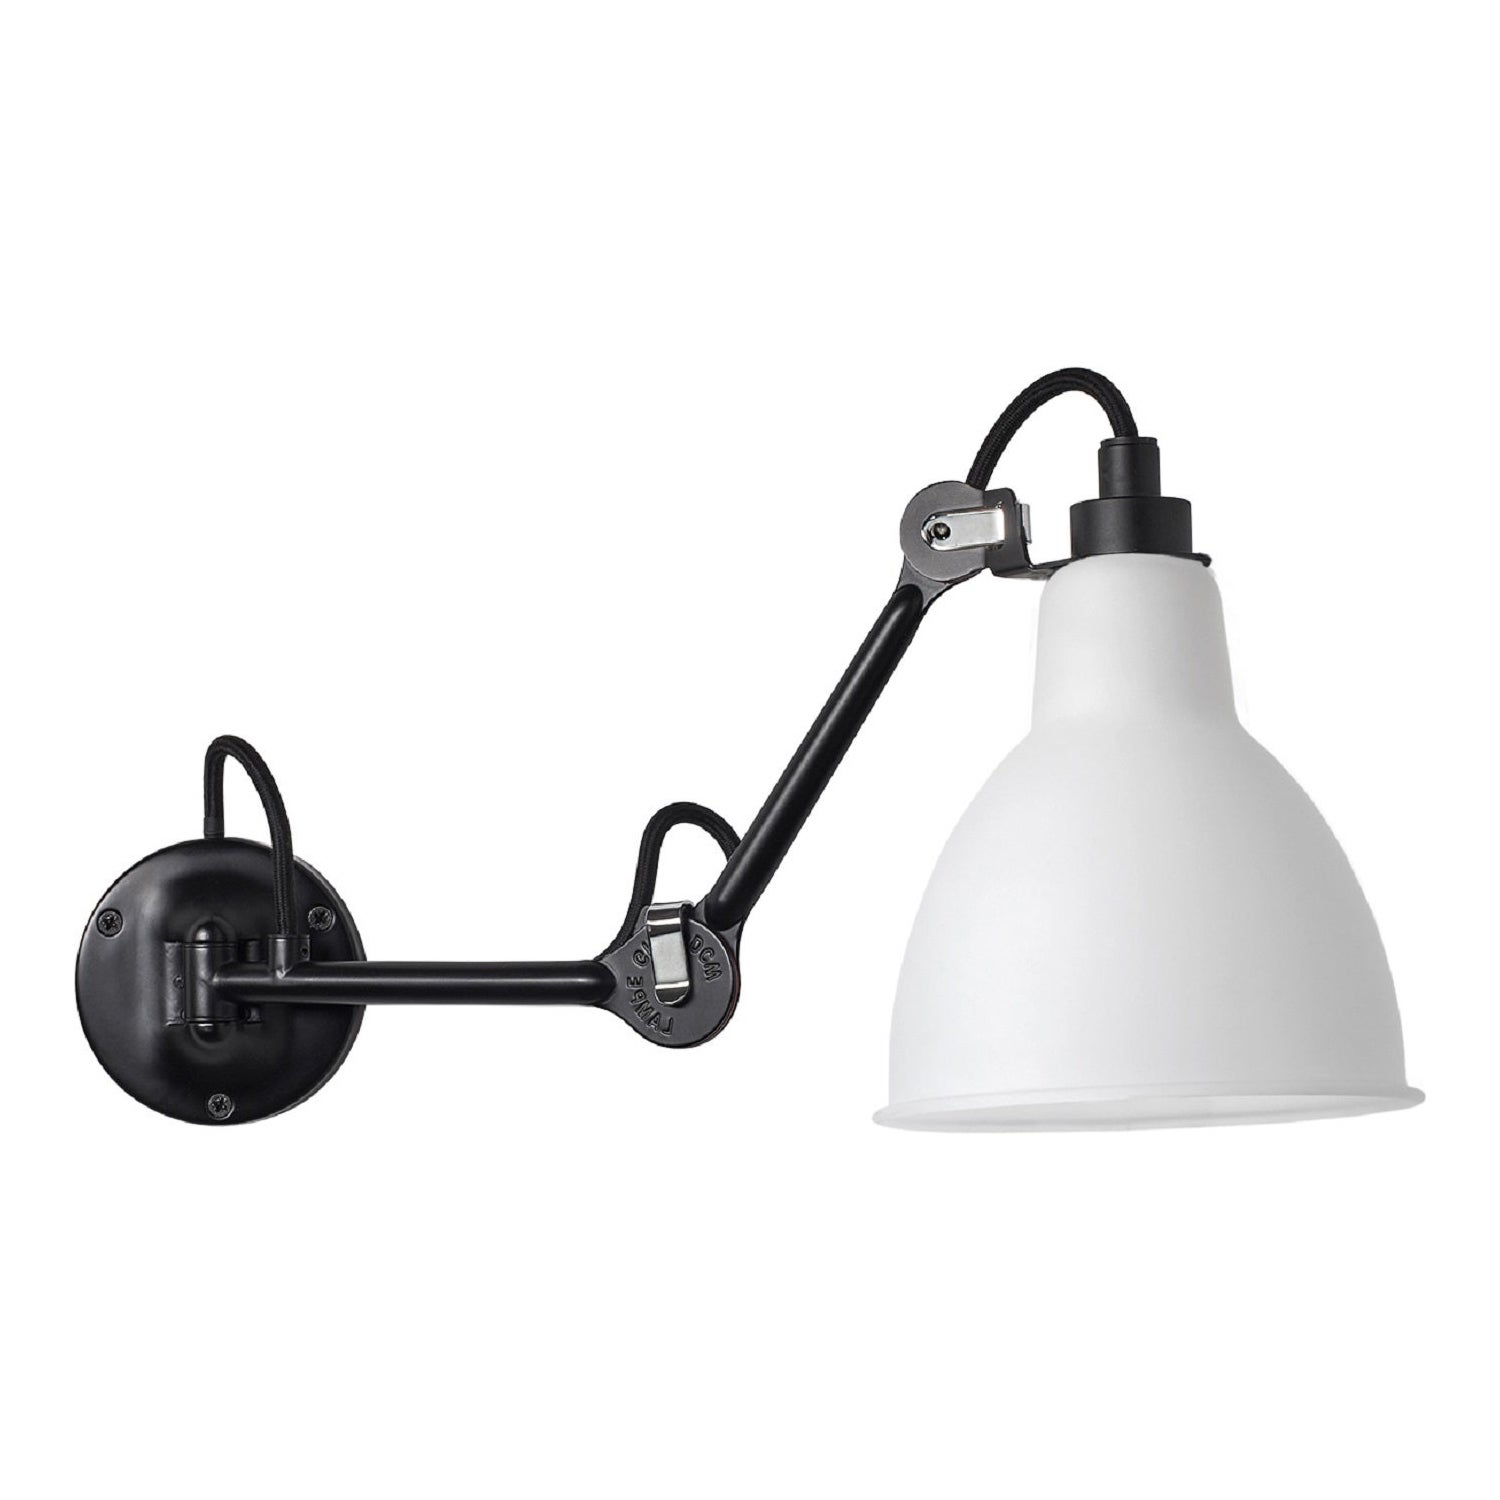 DCW Editions La Lampe Gras N°204 Wall Lamp in Black Arm & Polycarbonate Shade For Sale